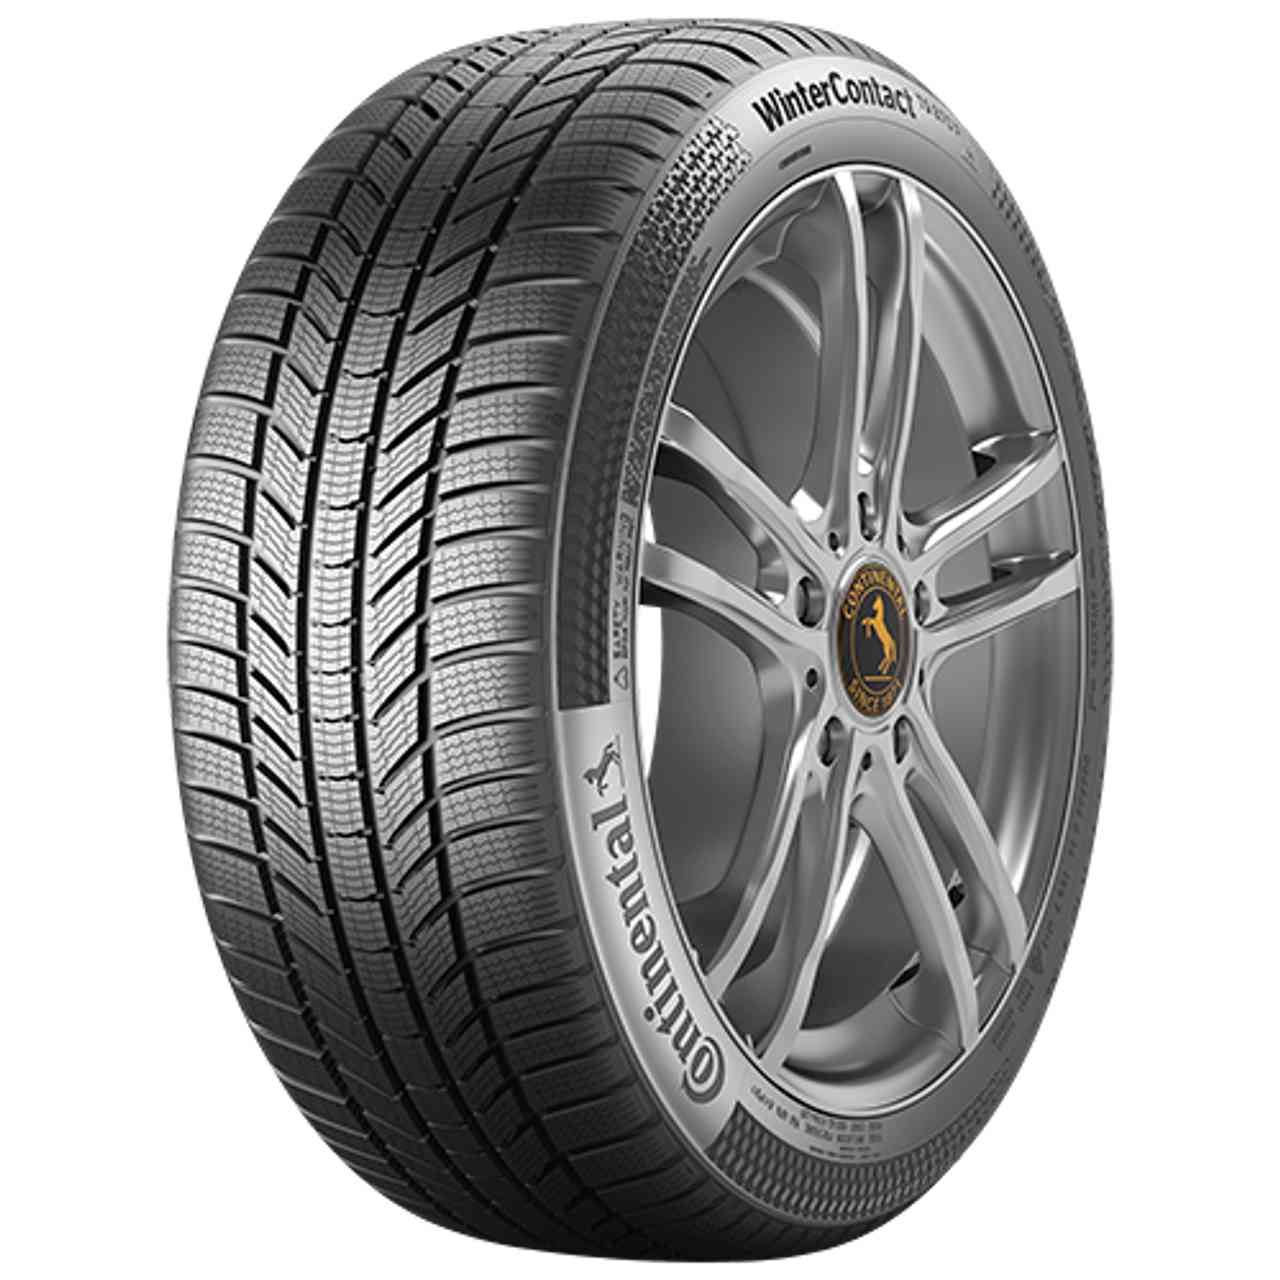 CONTINENTAL WINTERCONTACT TS 870 P (EVc) 255/45R20 105V FR BSW